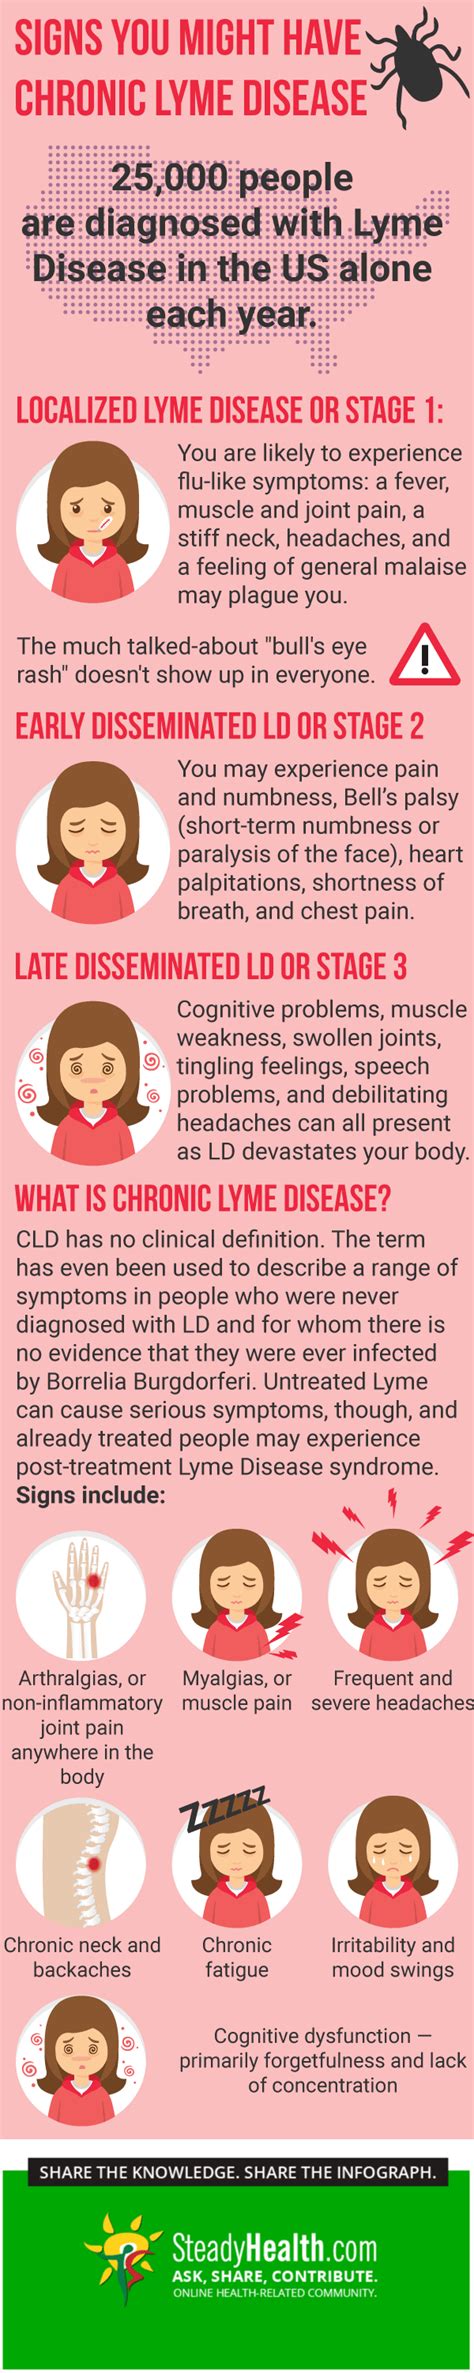 7 Signs You Might Have Chronic Lyme Disease Nervous System Disorders